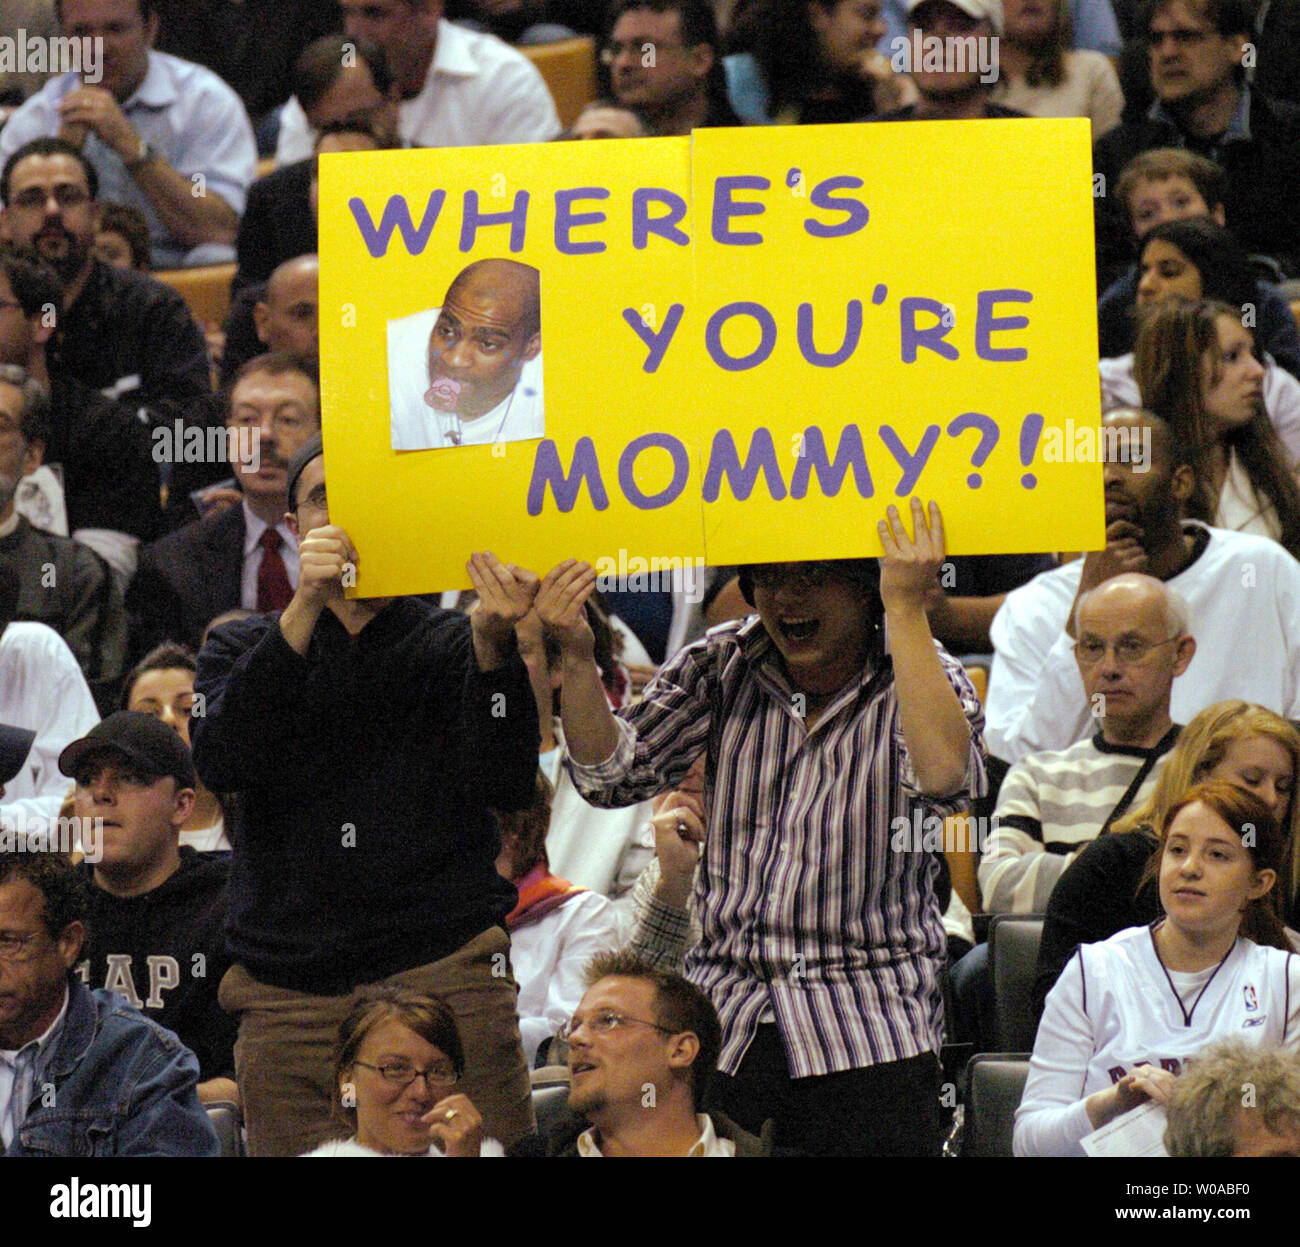 Fans heckled their former hero New Jersey Nets' Vince Carter throughout the game as the Toronto Raptors hosted the Nets at the Air Canada Center April 15, 2005 in Toronto, Canada. Carter who had a reputation as a mama's boy among fans here scored 39 points as he led the Nets to a 101-90 win over his former team in his first appearance back in Toronto after being traded. (UPI Photo/Christine Chew) Stock Photo